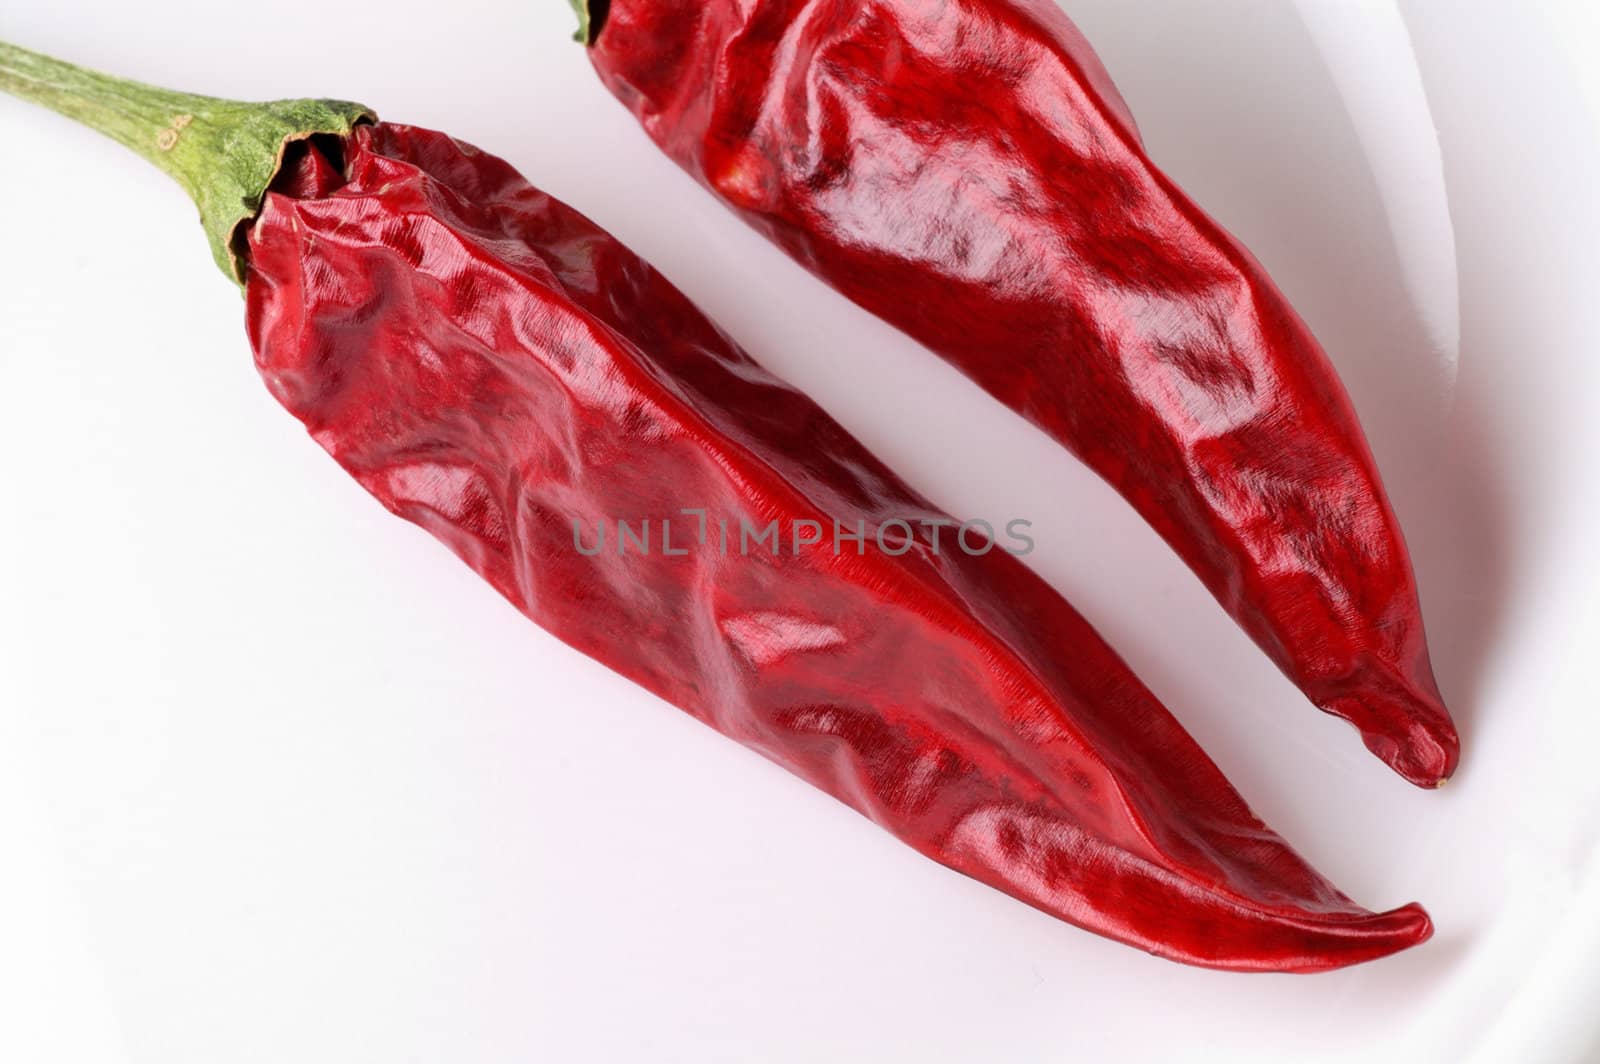 Dried red hot peppers on dish closeup by Laborer